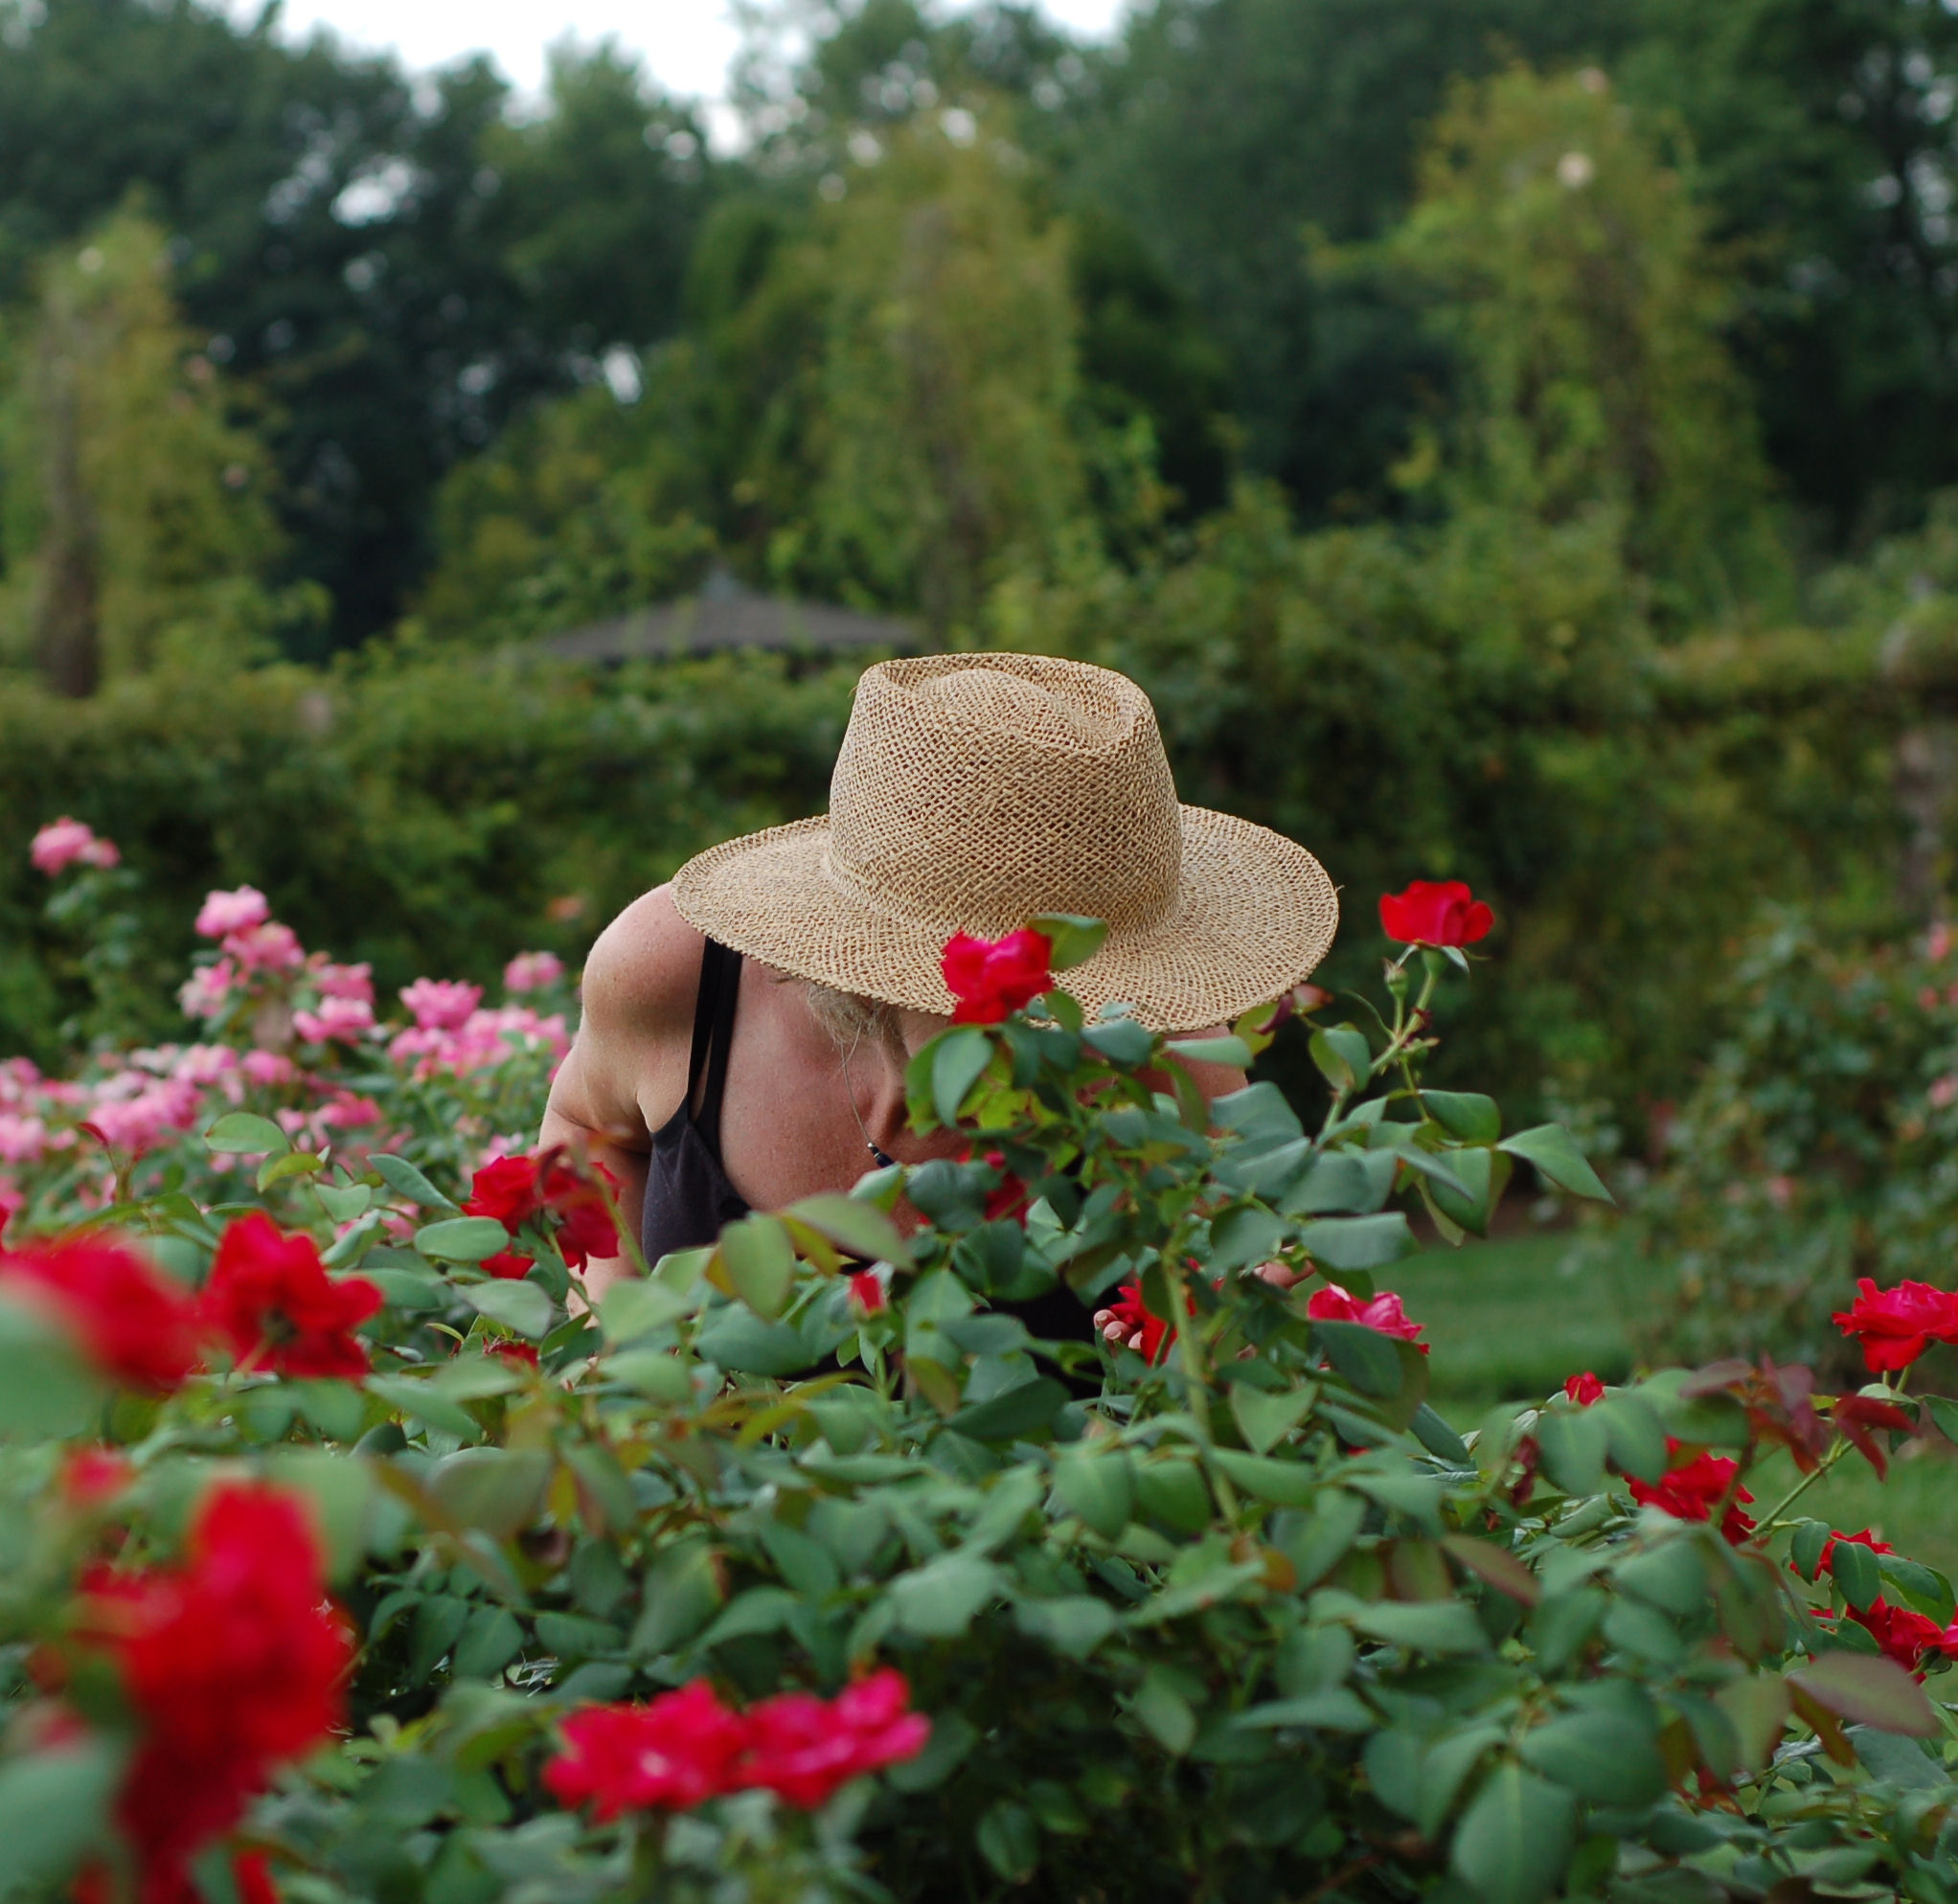 Enjoying The Roses In West Hartford (user submitted)